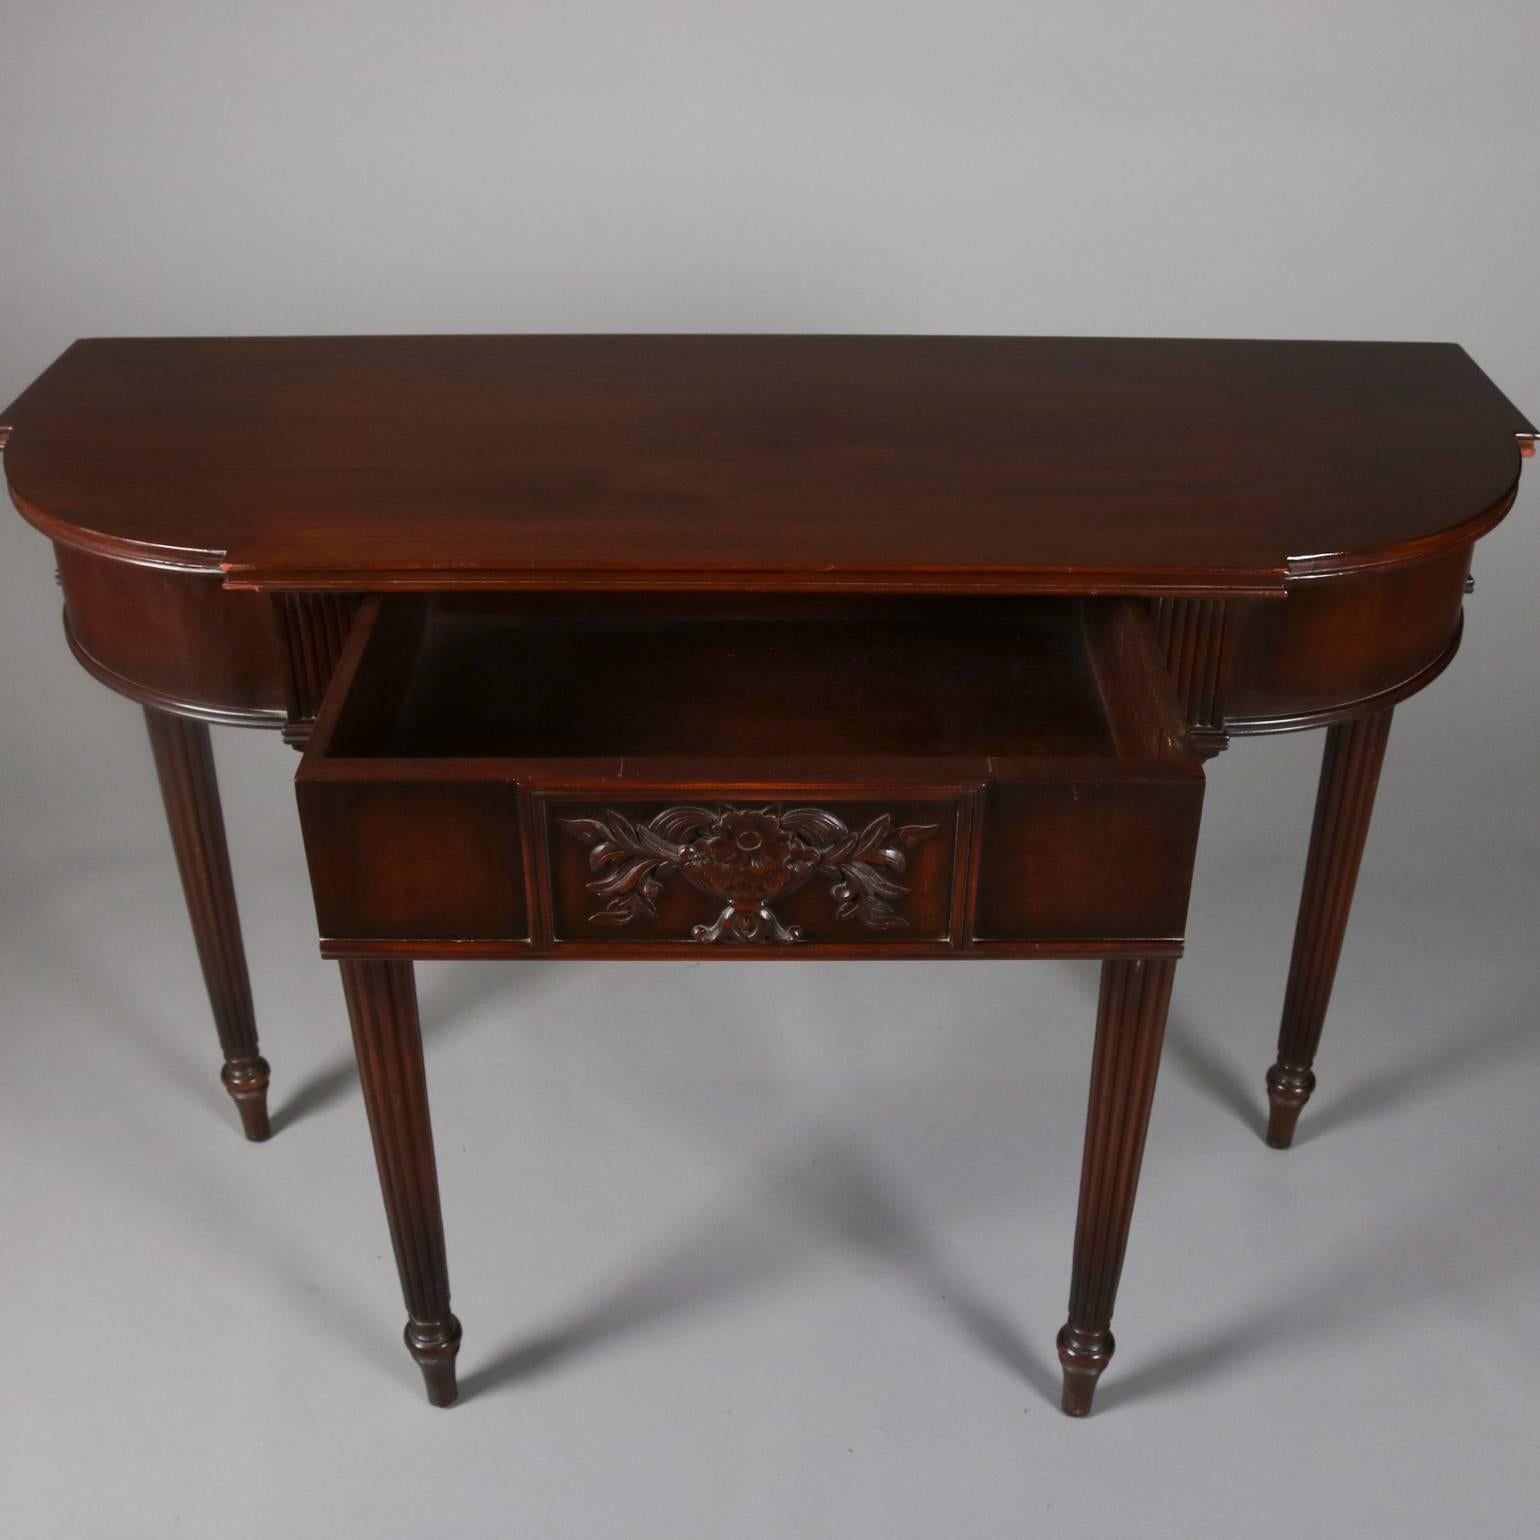 Antique carved mahogany console set by Elgin A. Simonds Company Furniture features console table, centre drawer with carved central floral basket bouquet and supported by reeded and tapered legs; mirror with cut-out and ebonized mahogany frame, en